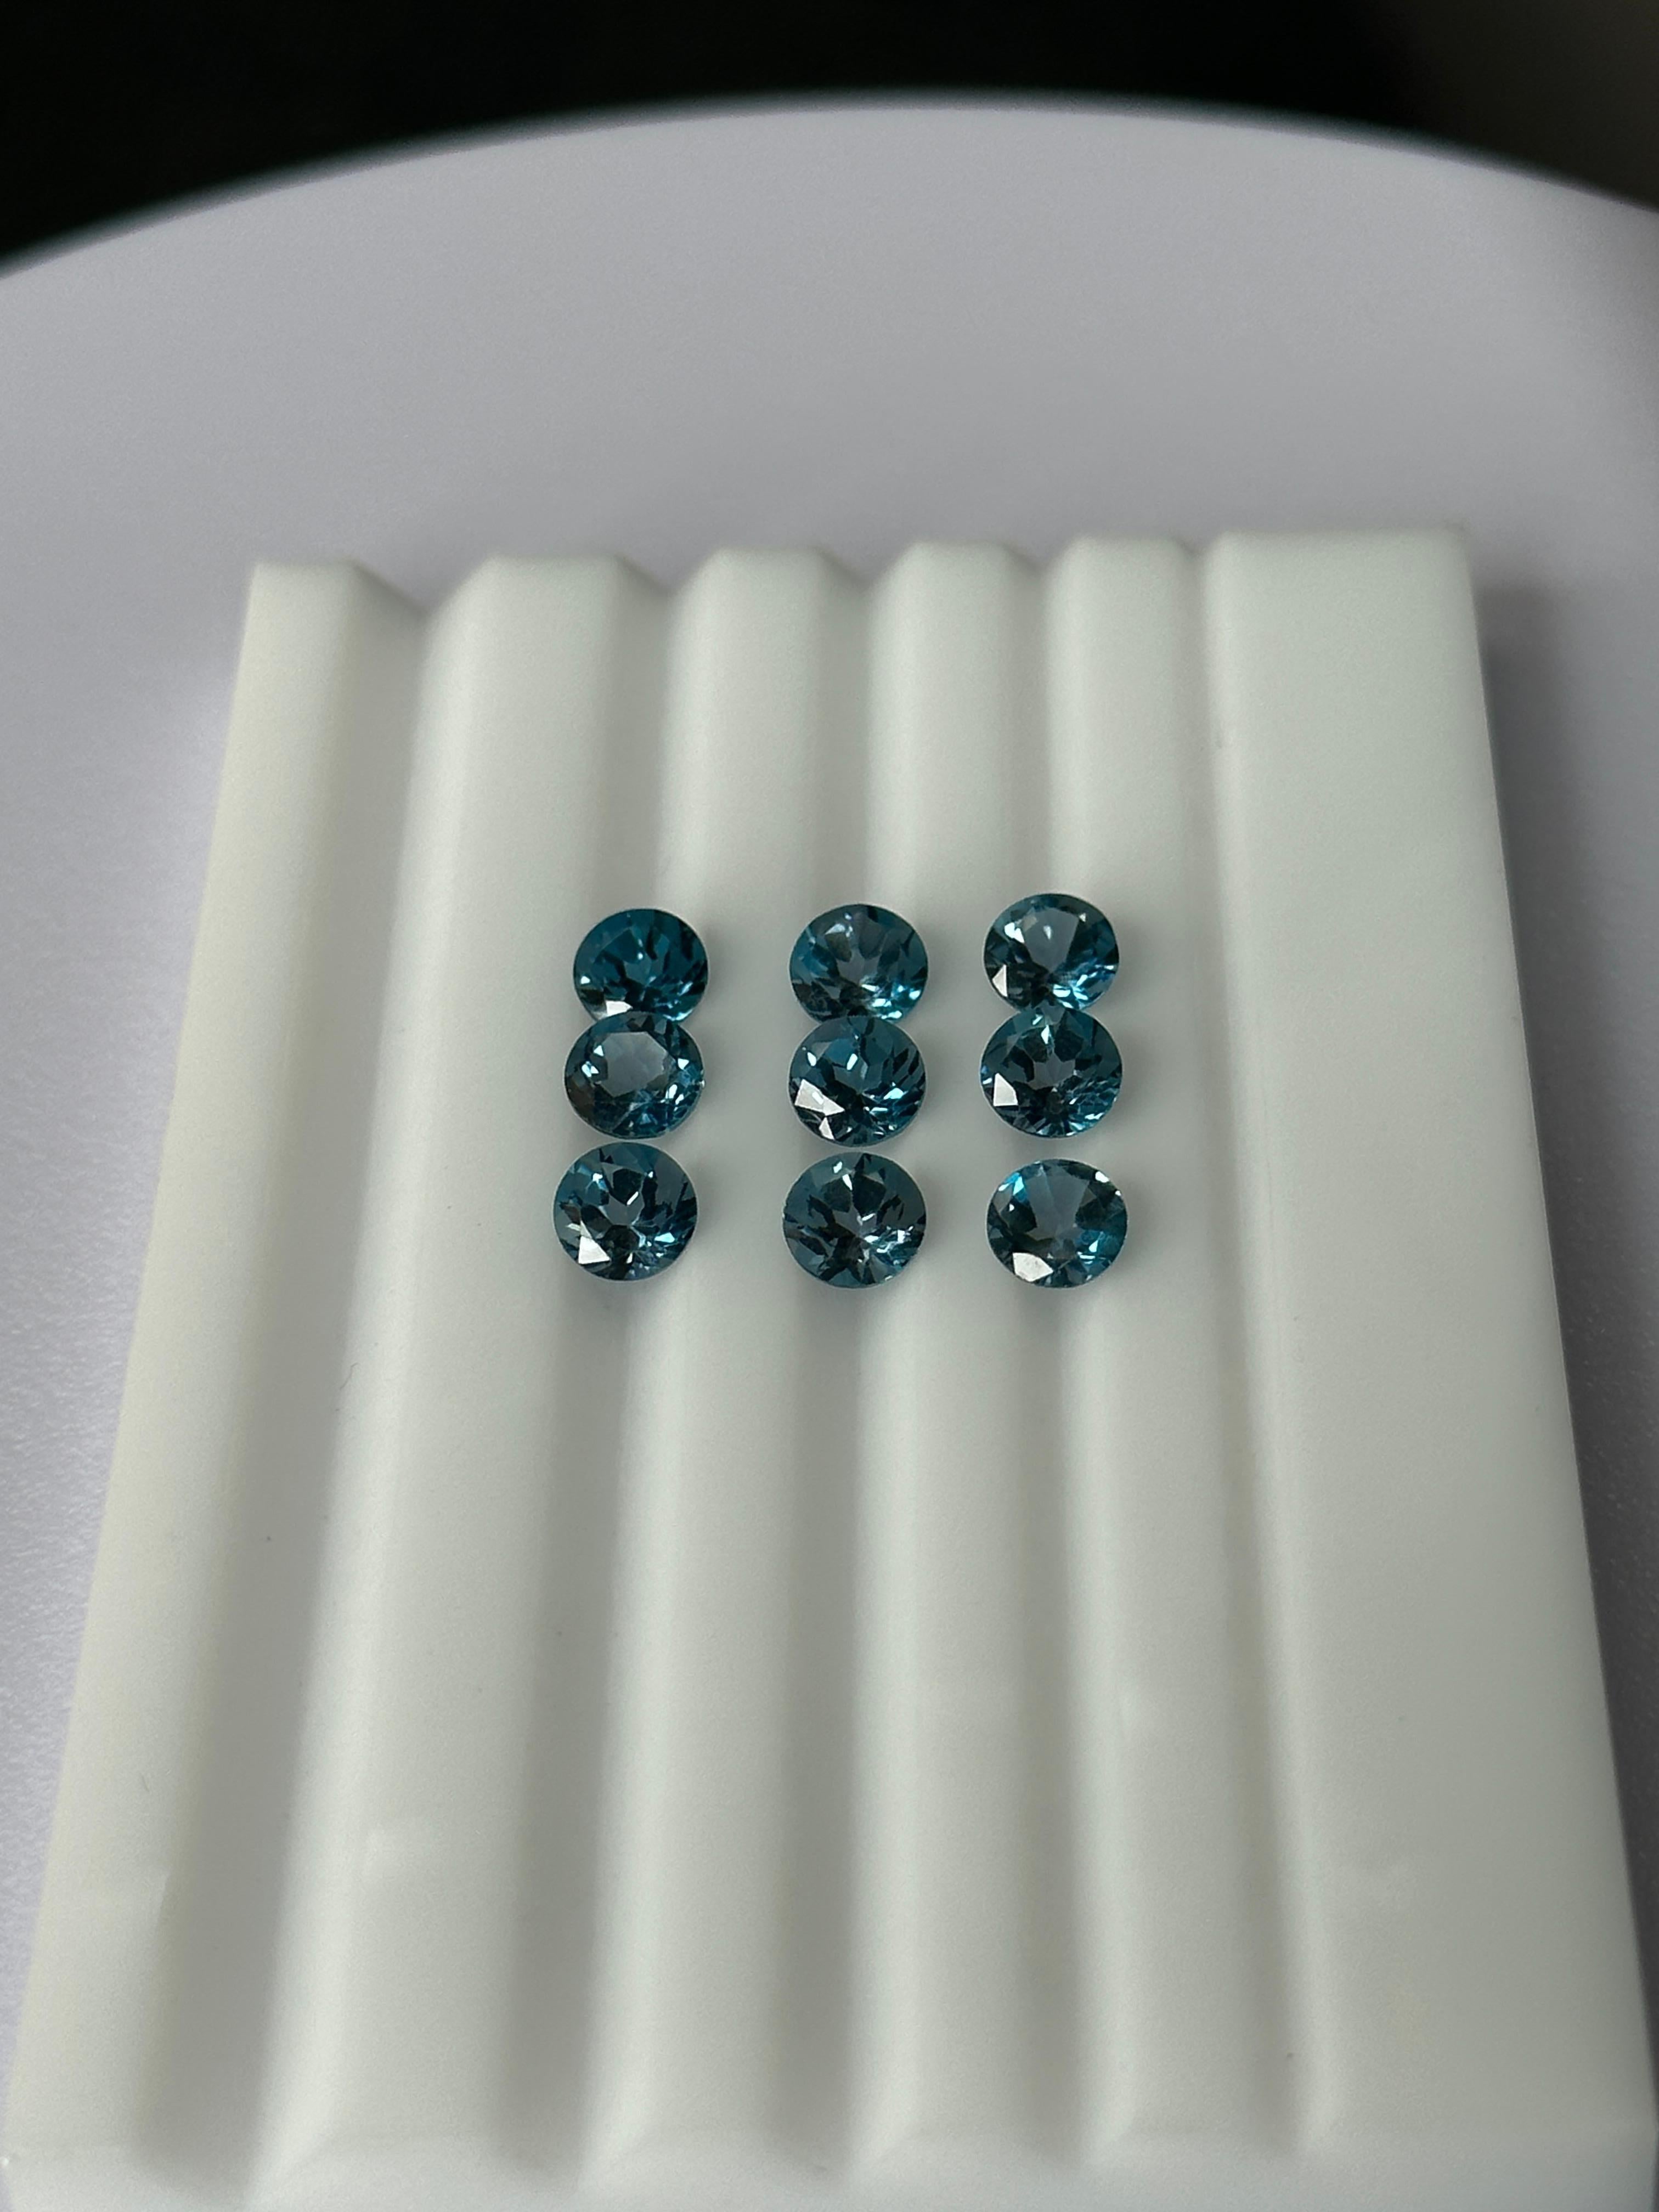 A Blue Topaz lot including 9 gems amounting to a total of 5.55 carats in weight.
These blue topazes fall into the London Blue category due to their darker tone and very slight greenish shade of blue.
Topaz is one of the most sought-out semiprecious